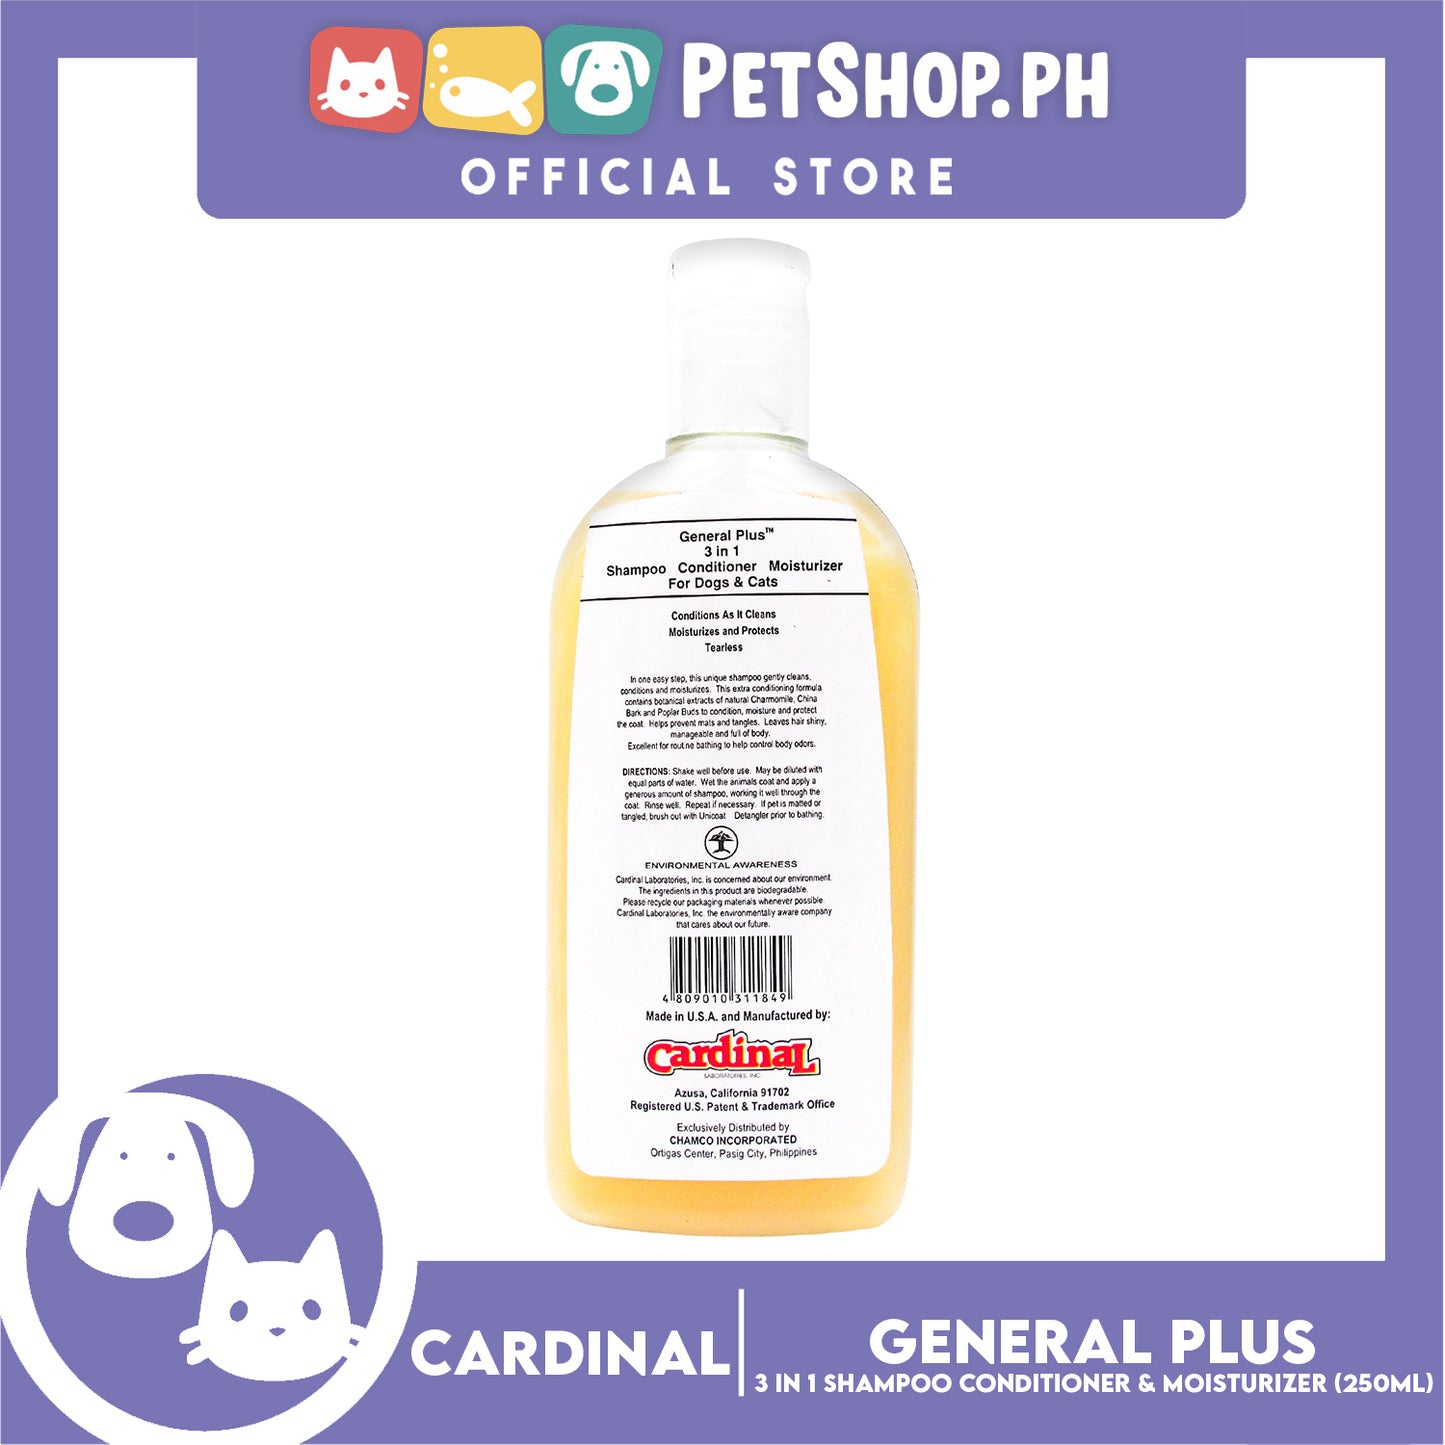 Cardinal General Plus 3 in 1 Shampoo, Conditioner and Moisturizer 250ml For Dogs and Cats